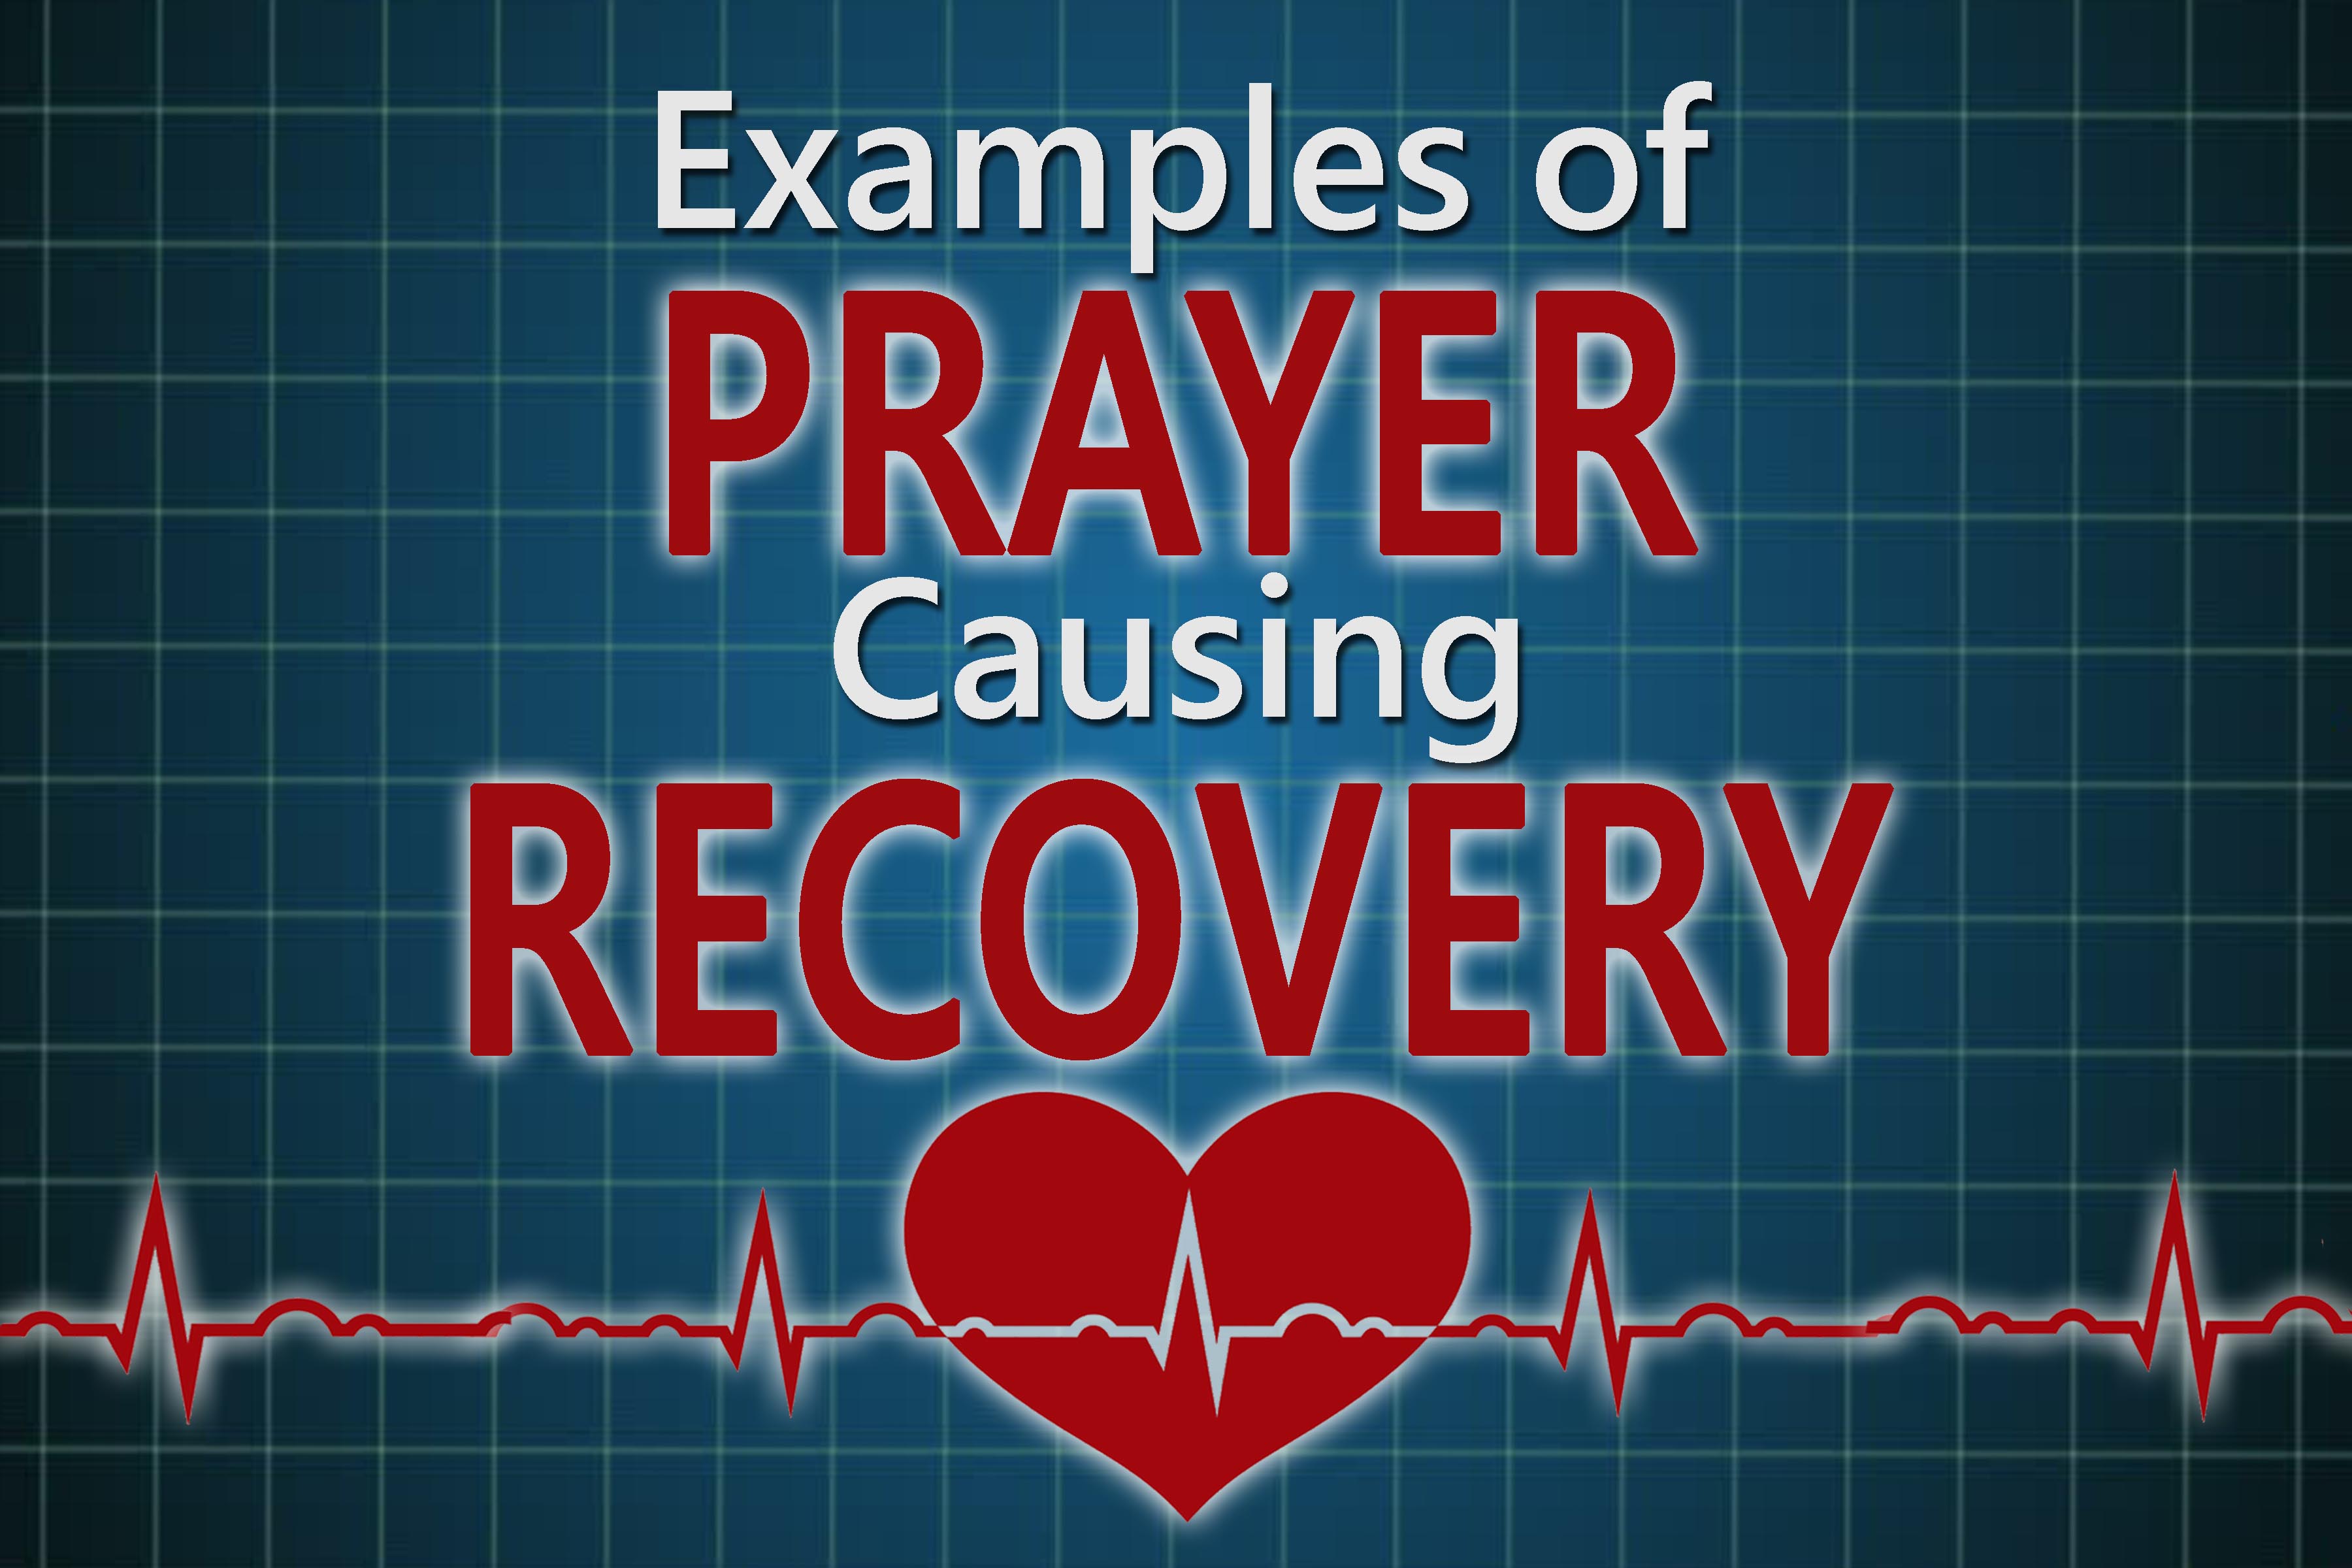 11-12-17 Examples of Prayer Causing Recovery